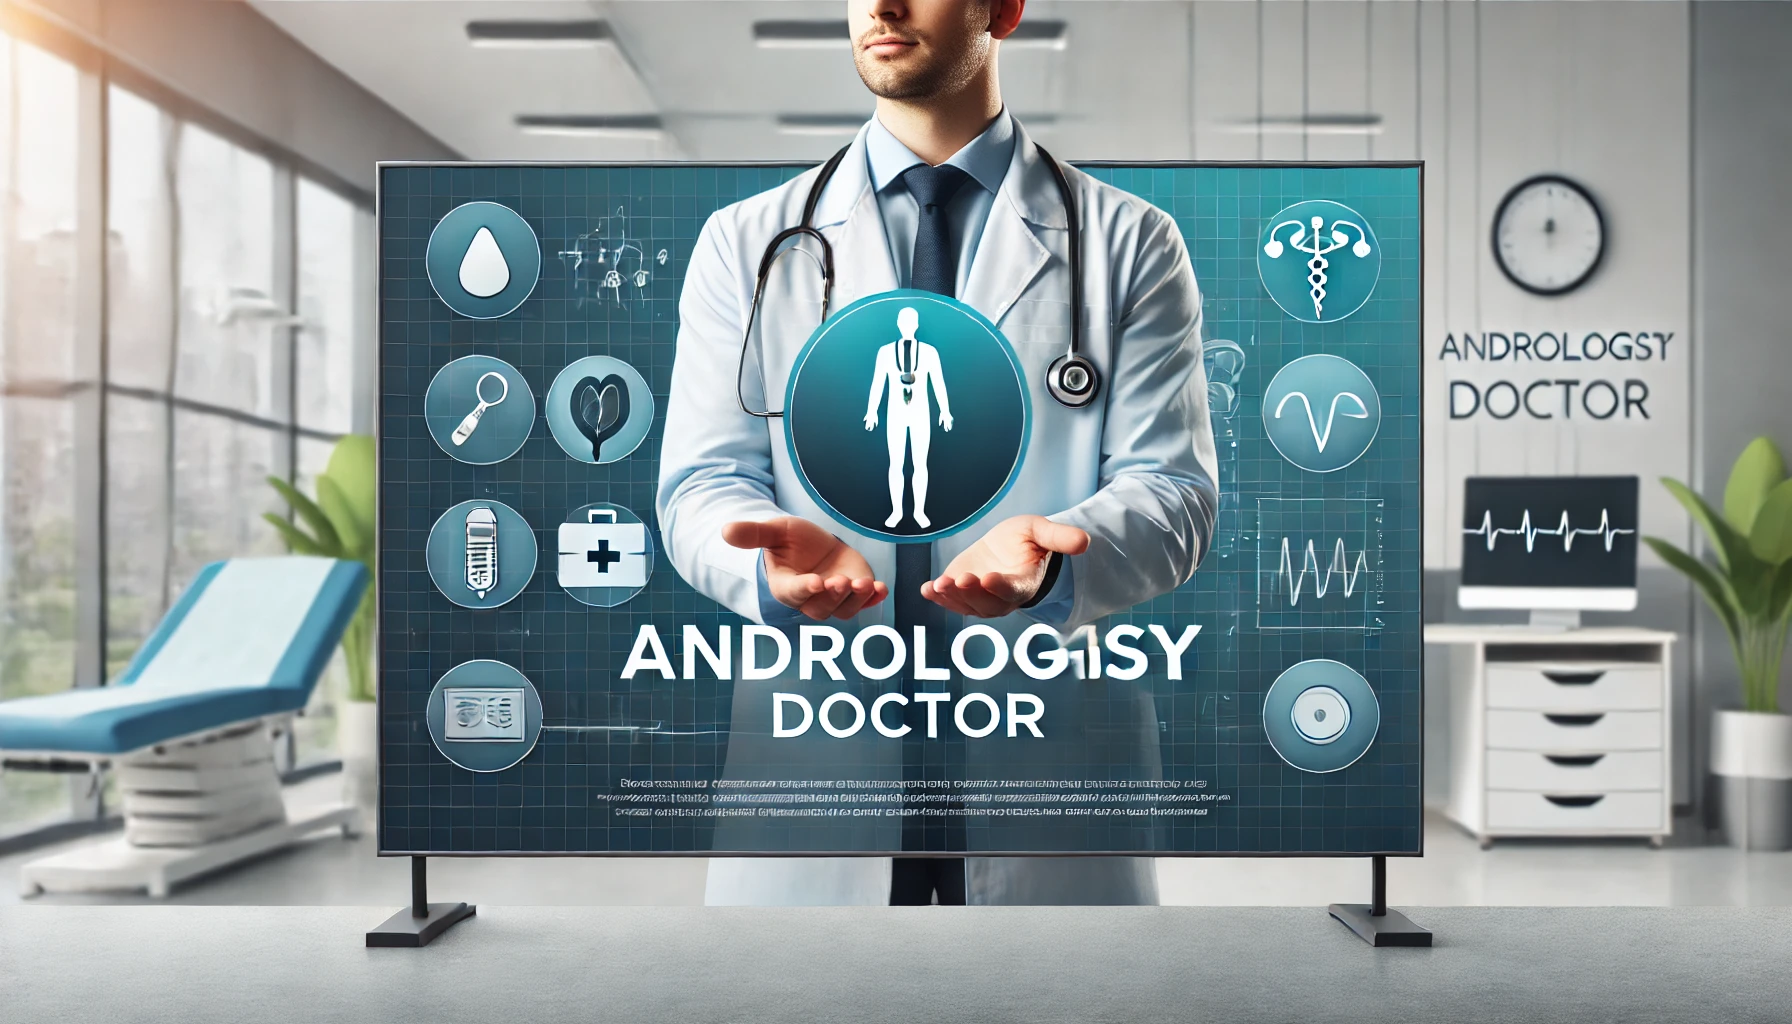 Andrologist Doctor